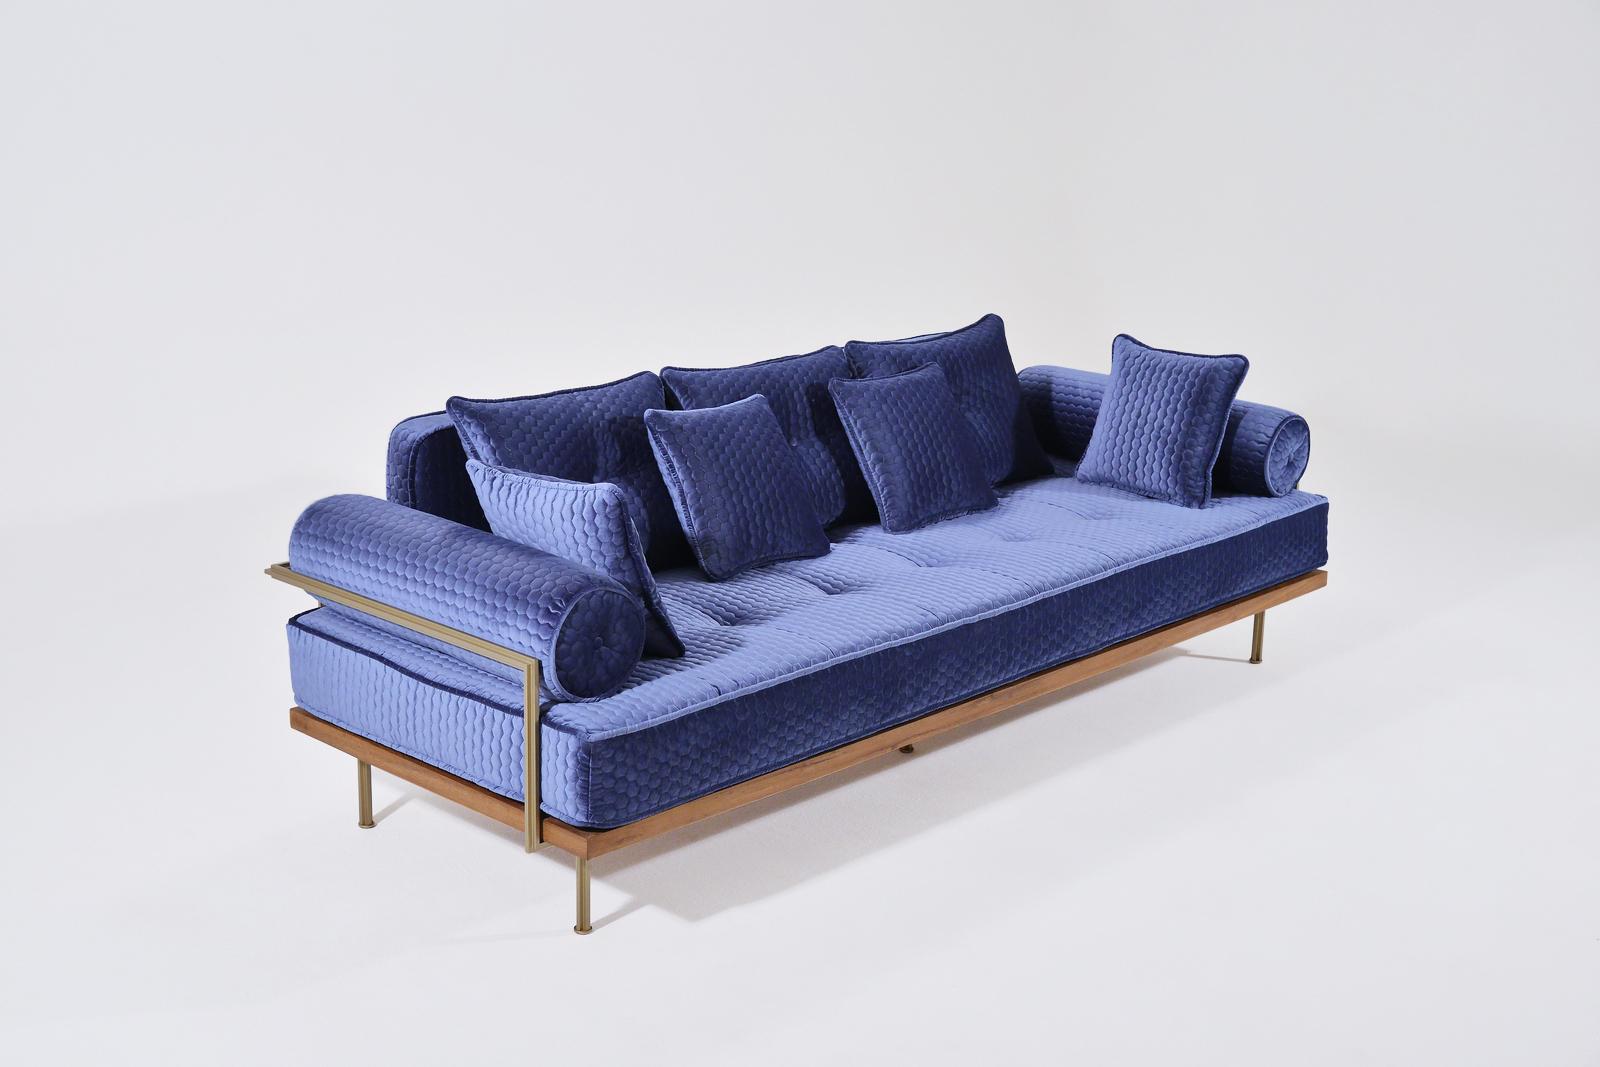 We are huge fans of Fabrics by Gastón and Daniela. We opted for their honeycomb textured Quercus in this fabulous blue as we feel this contrasts beautifully with the rigid, geometrical design of our sofa.

Should you prefer to dress with your own